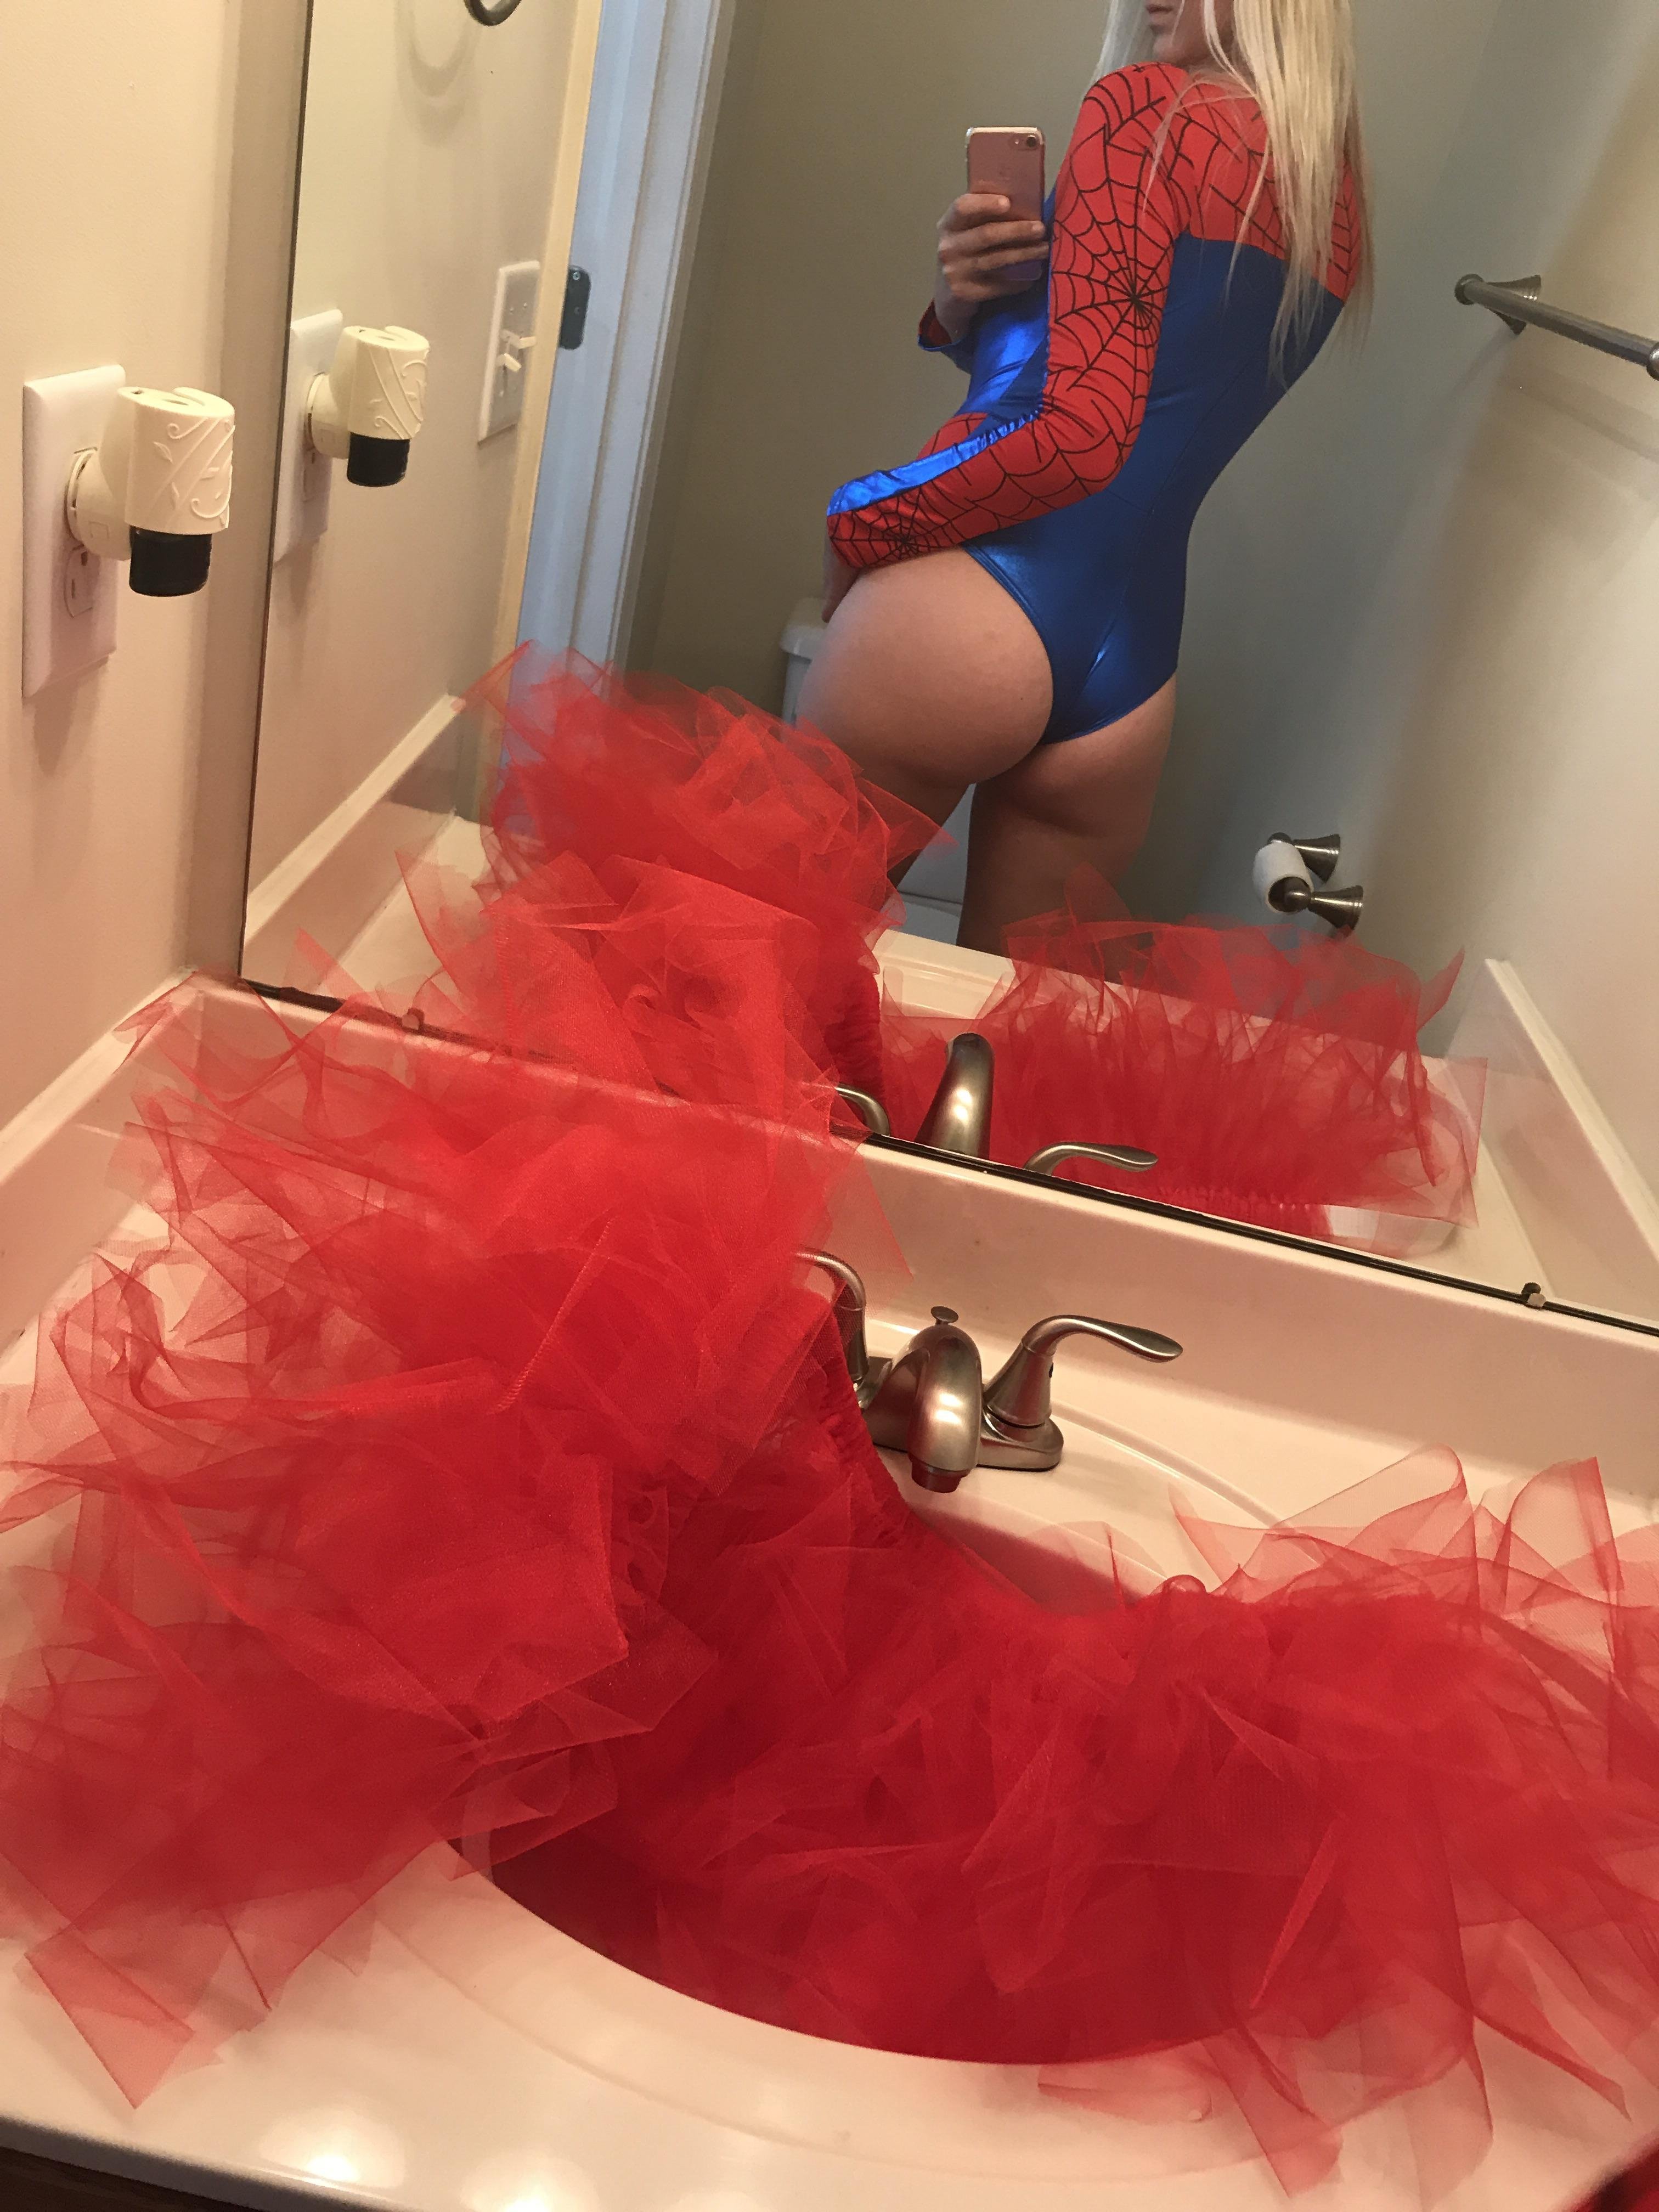 Spidey Progress! Added drop panels and making a tutu to follow con-dress codes. Making staff/props is next!